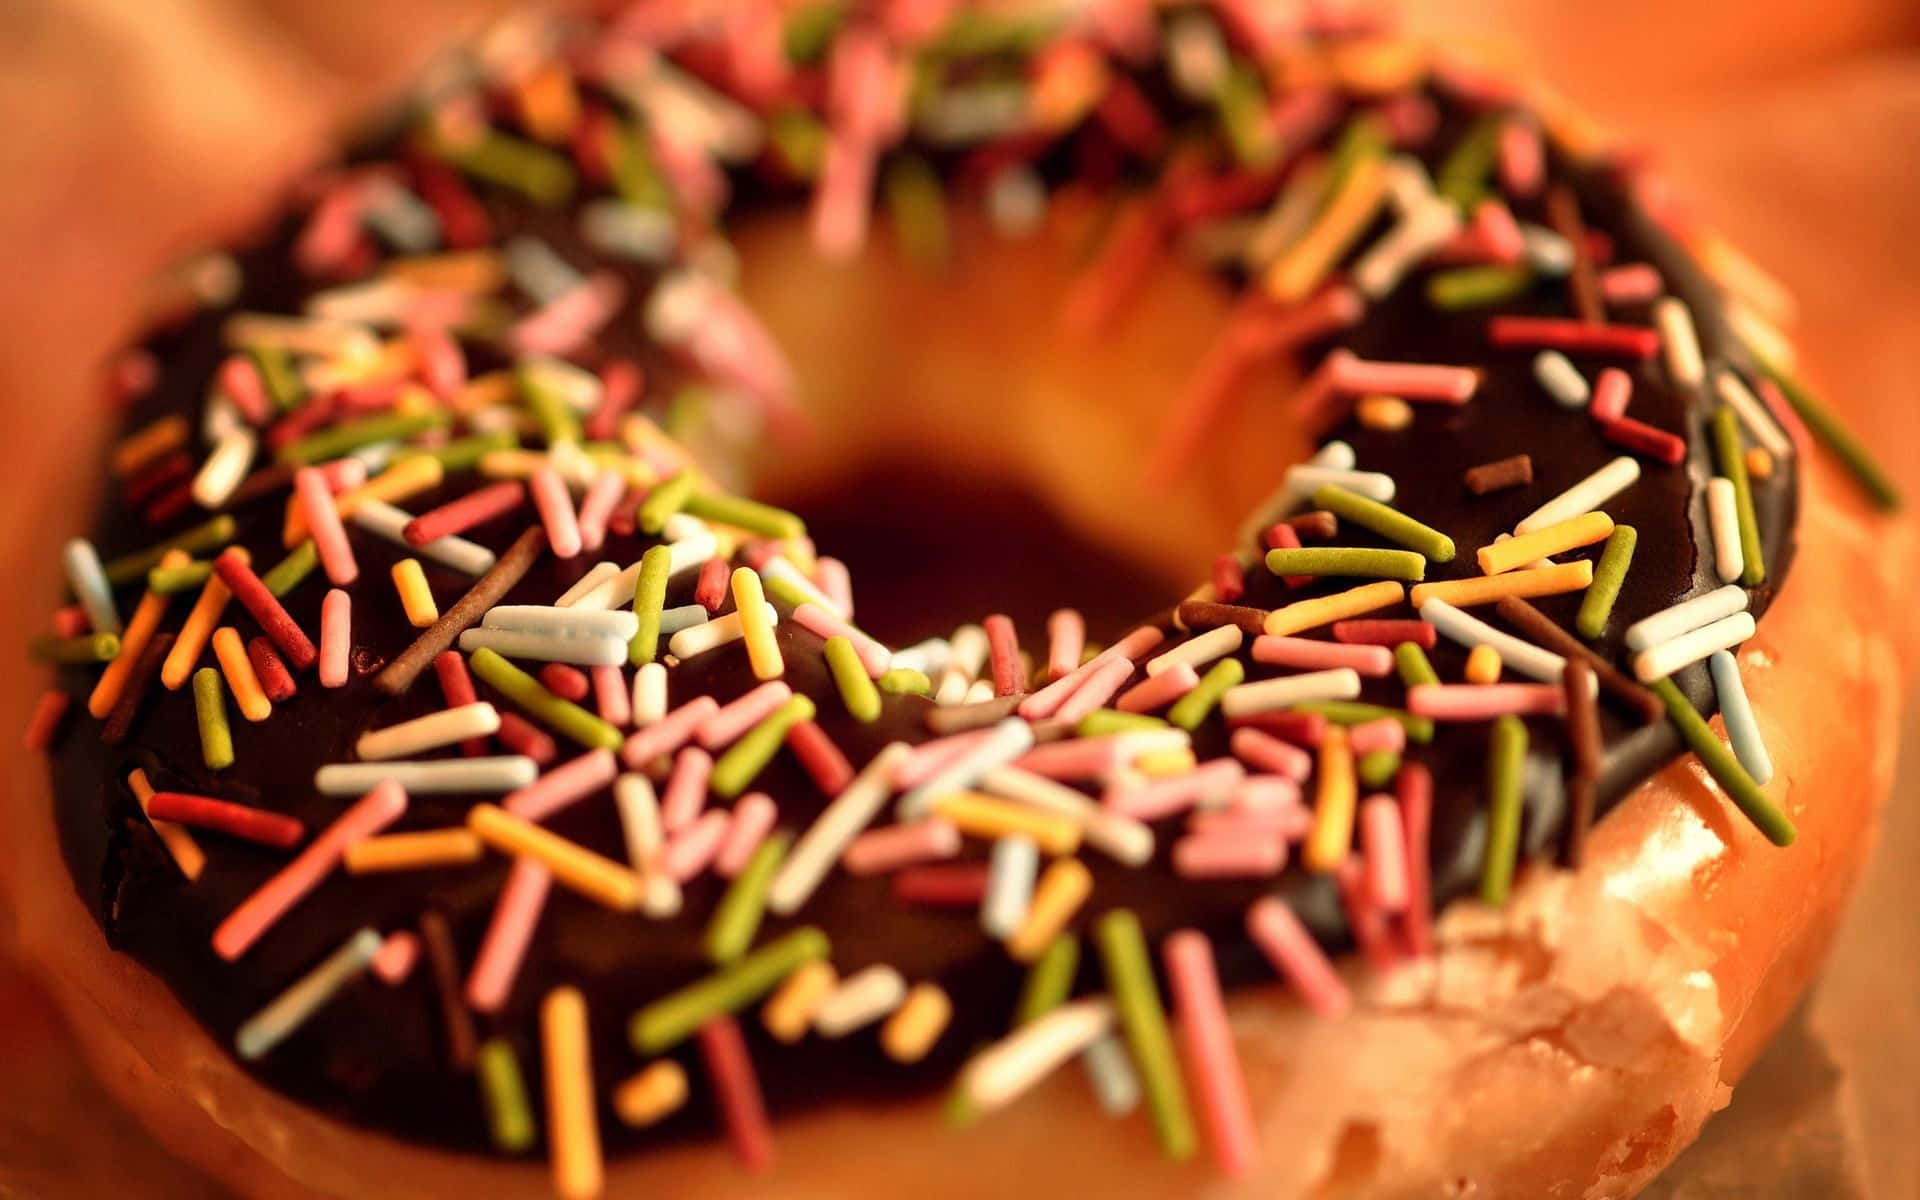 Delight your taste buds with scrumptious donuts